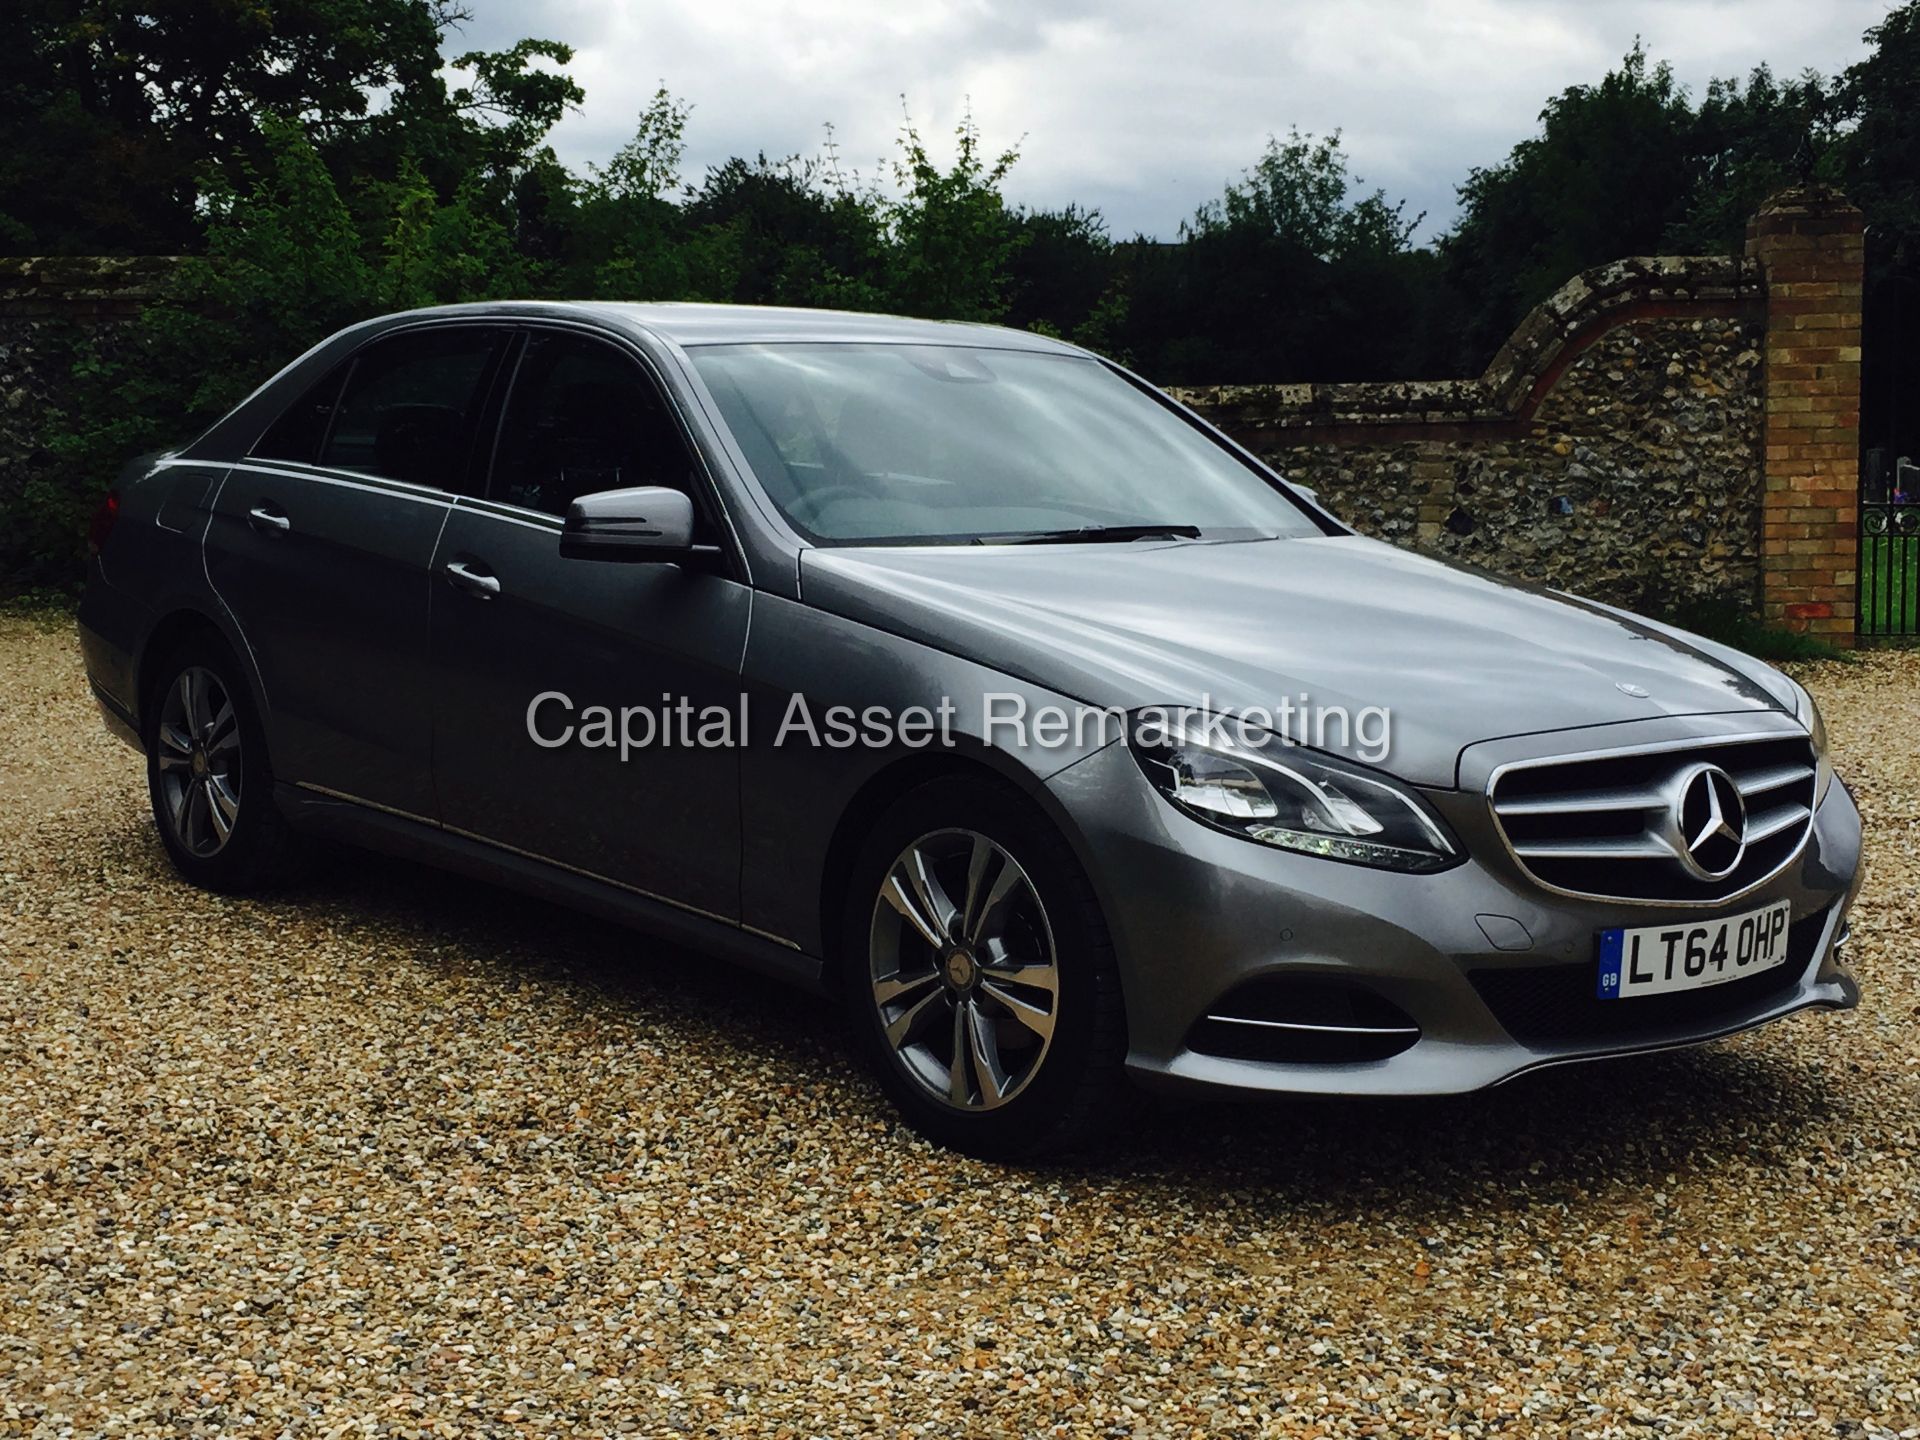 MERCEDES-BENZ E220 CDI 'BLUETEC' (2014 - 64 REG) LEATHER - AUTO - SAT NAV (1 OWNER FROM NEW)